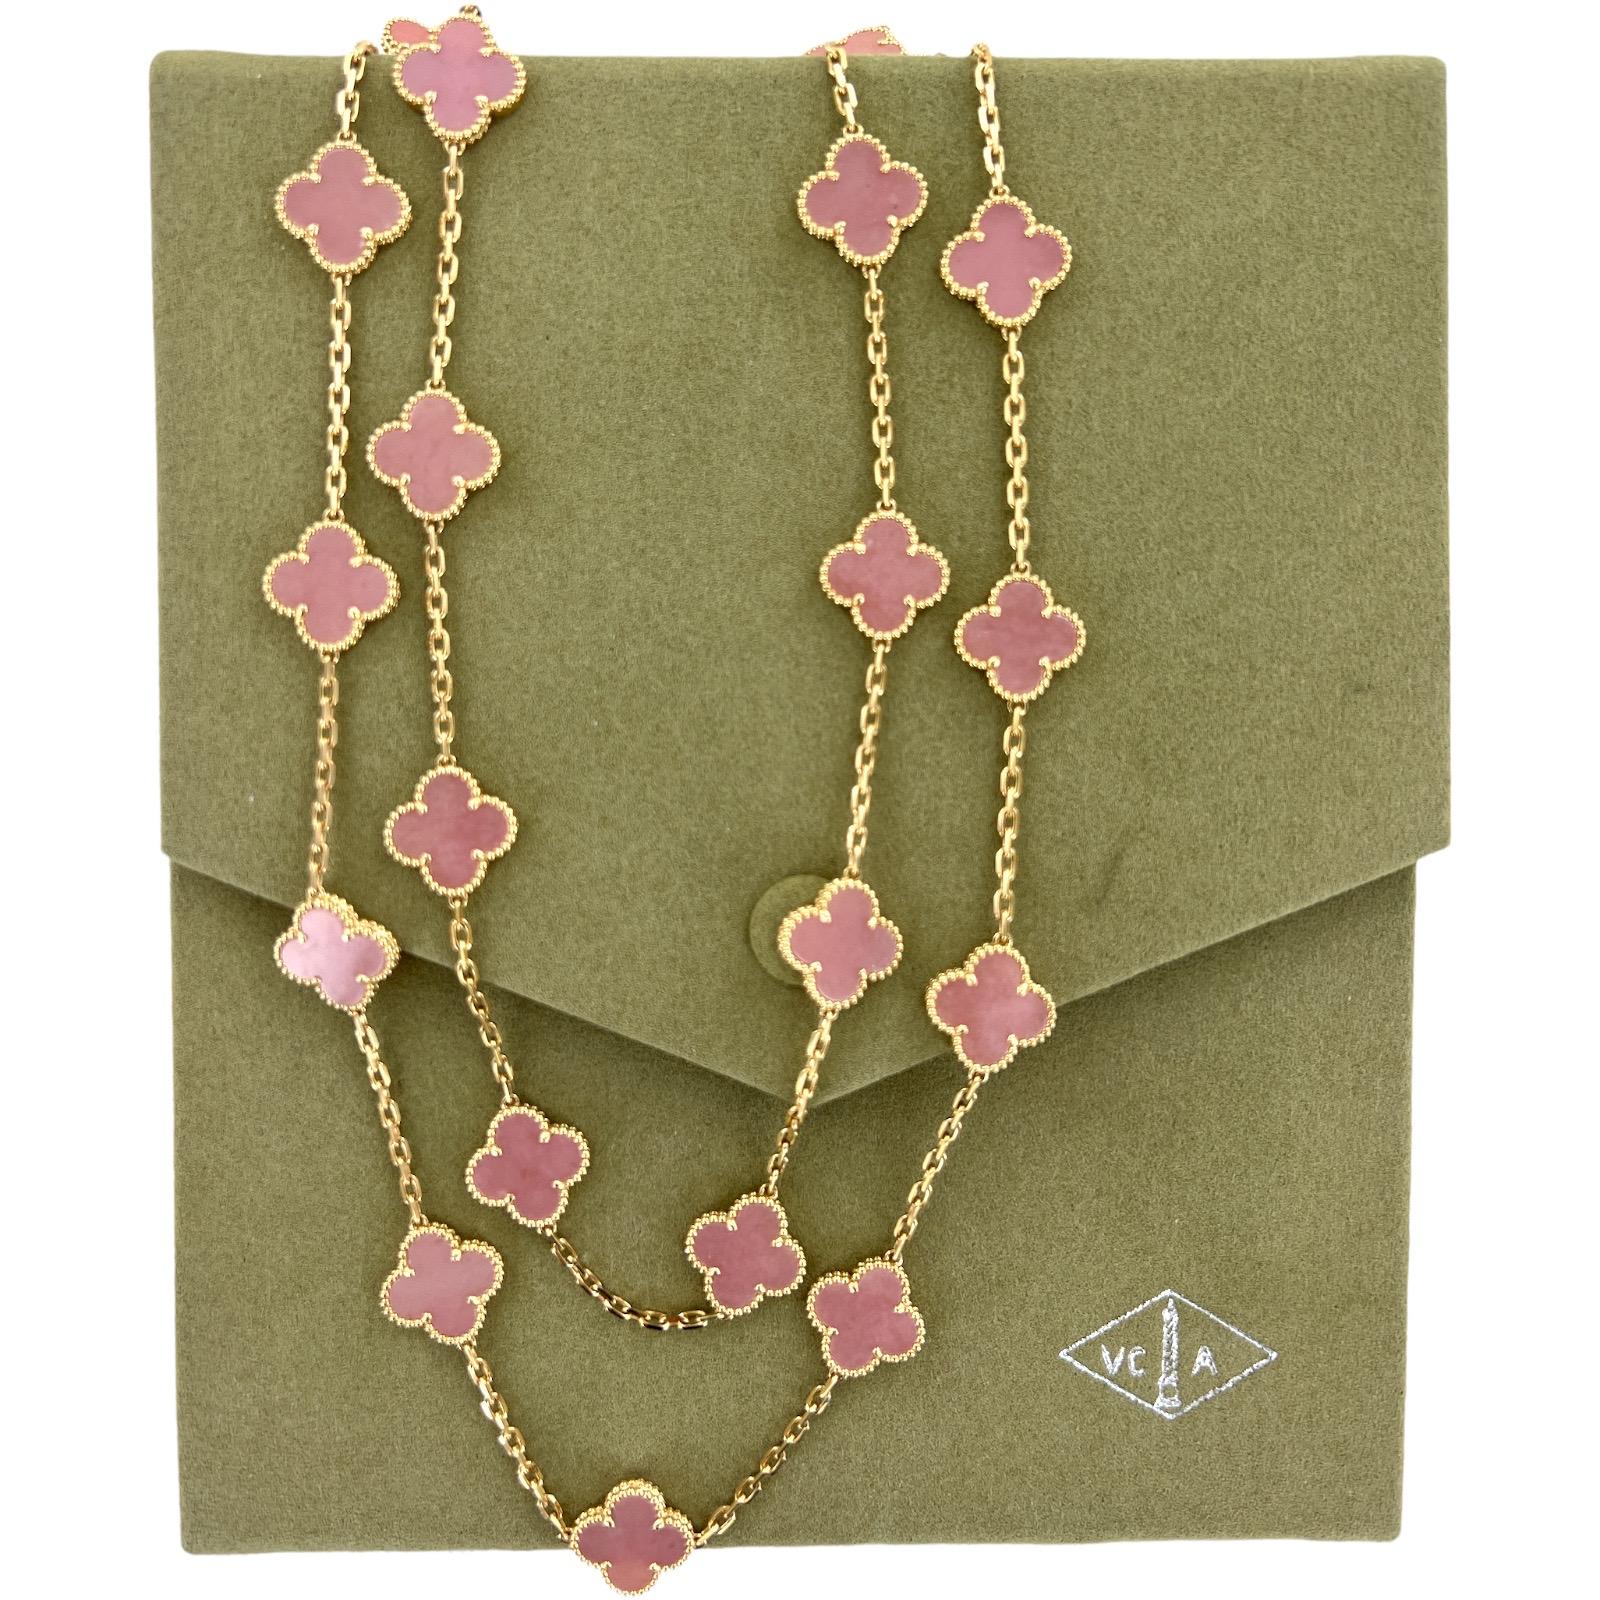 Van Cleef & Arpels Vintage Alhambra Pink Opal 20 Motif Necklace fashioned in 18 karat yellow gold. The necklace features 20 opal stations, and measures 34 inches in length. The necklace, circa 2015, is a rare and retired piece from the collection.